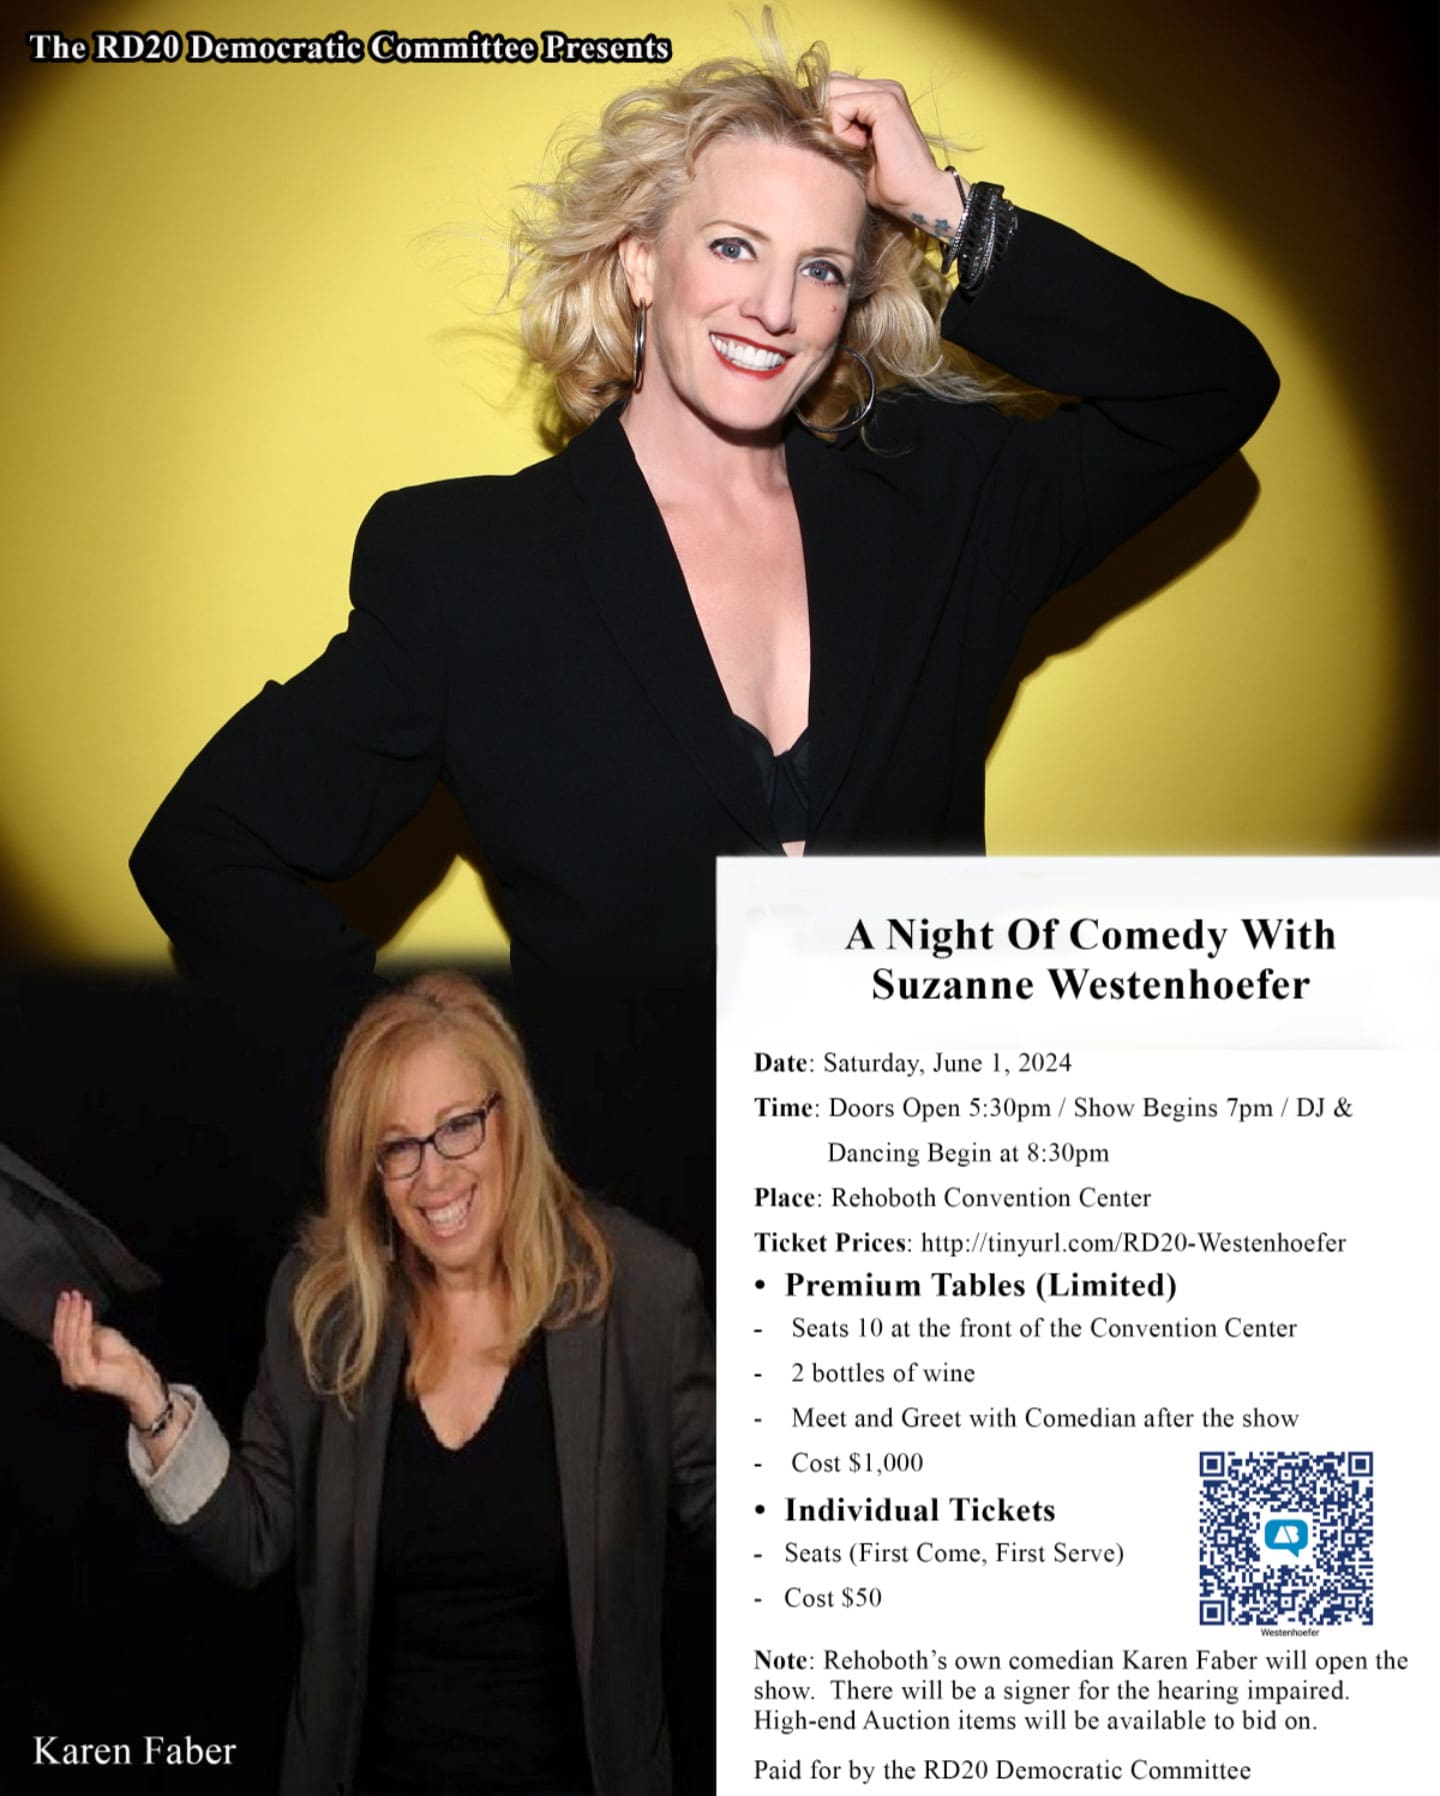 A Night of Comedy with Suzanne Westenhoefer - Fundraiser for RD 20 Delaware Democrats